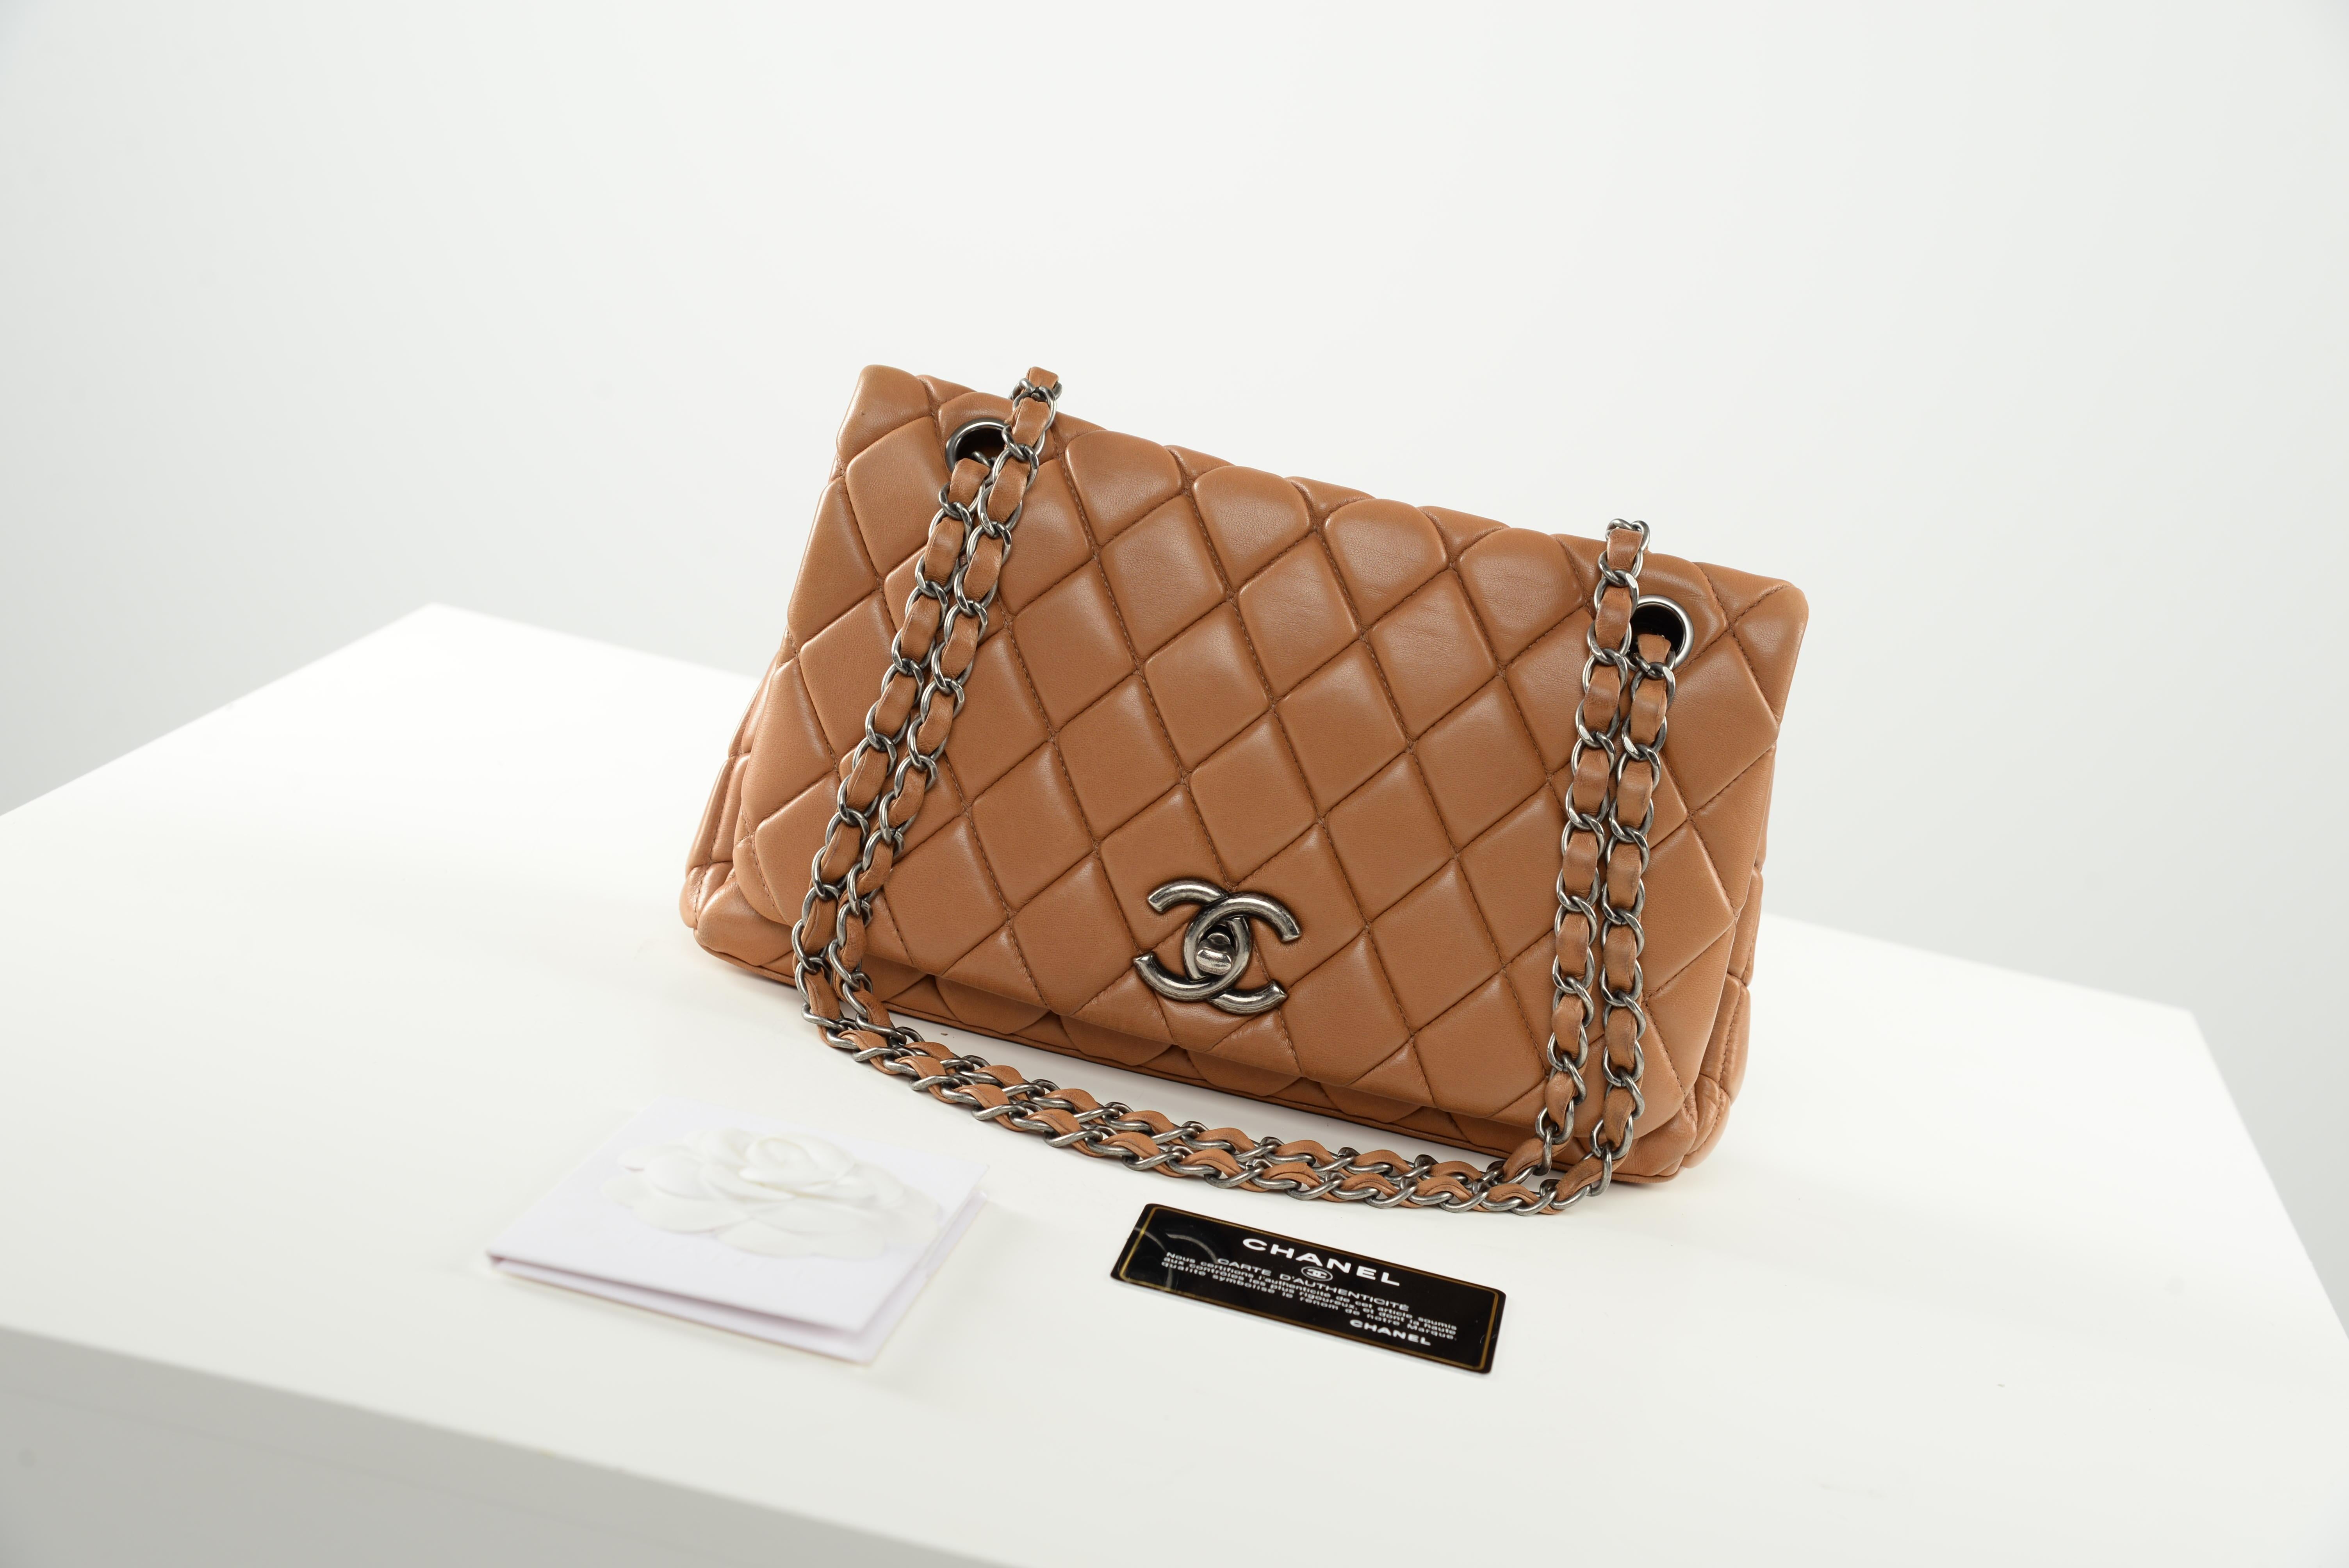 From the collection of SAVINETI we offer this Chanel Quilted Single Flap bag:
-	Brand: Chanel
-	Model: Single Flap
-	Year: 2011
-	Code: 14934880
-	Condition: Good (see pictures)
-	Materials: Lambskin leather, ruthenium hardware
-	Extras: hologram &